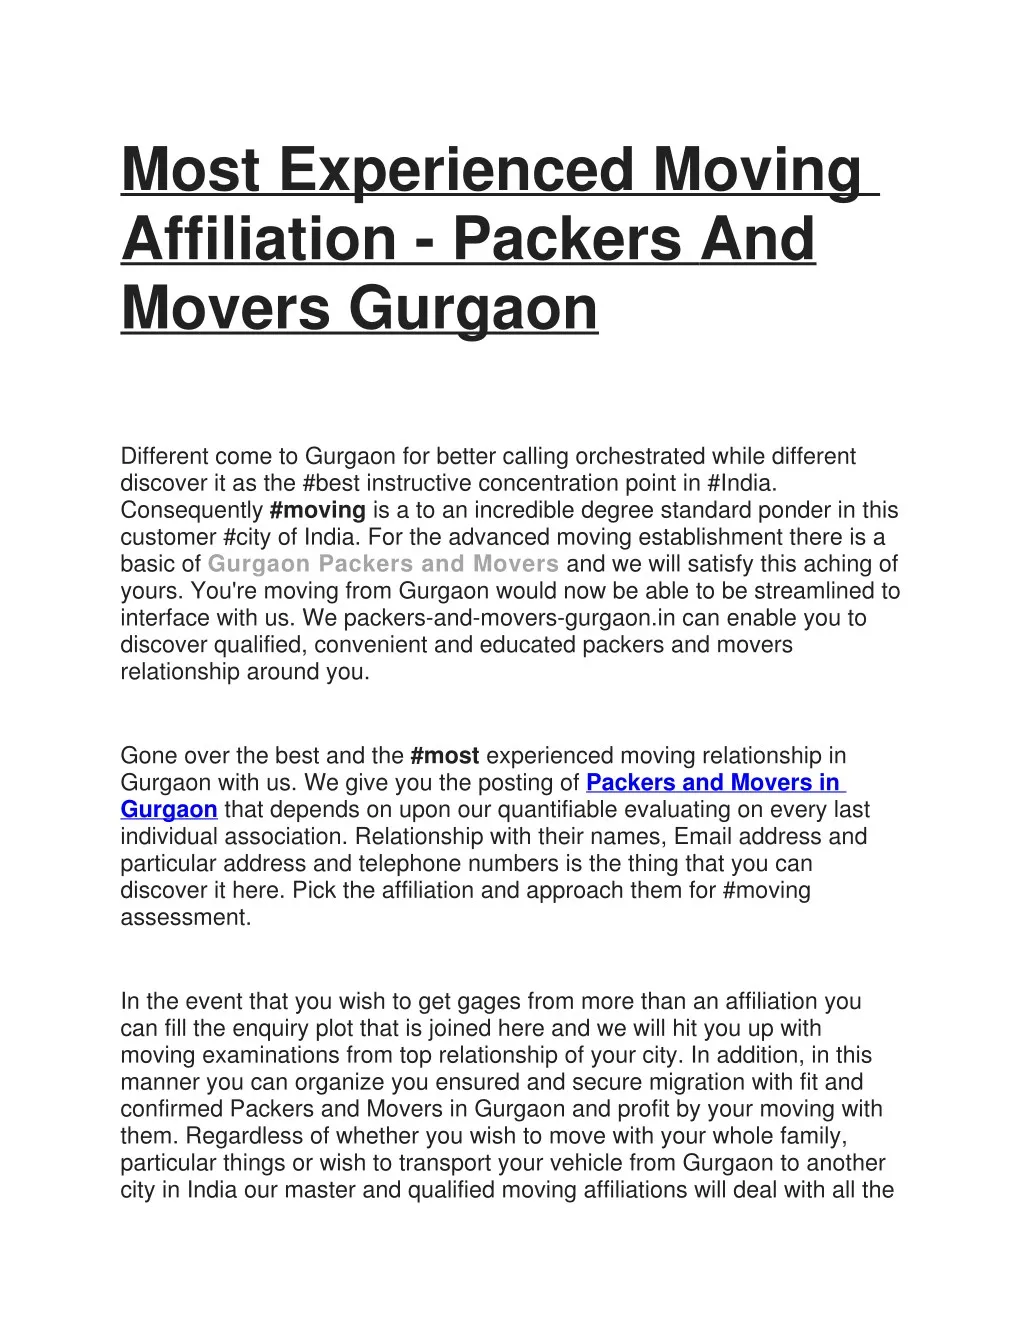 most experienced moving affiliation packers